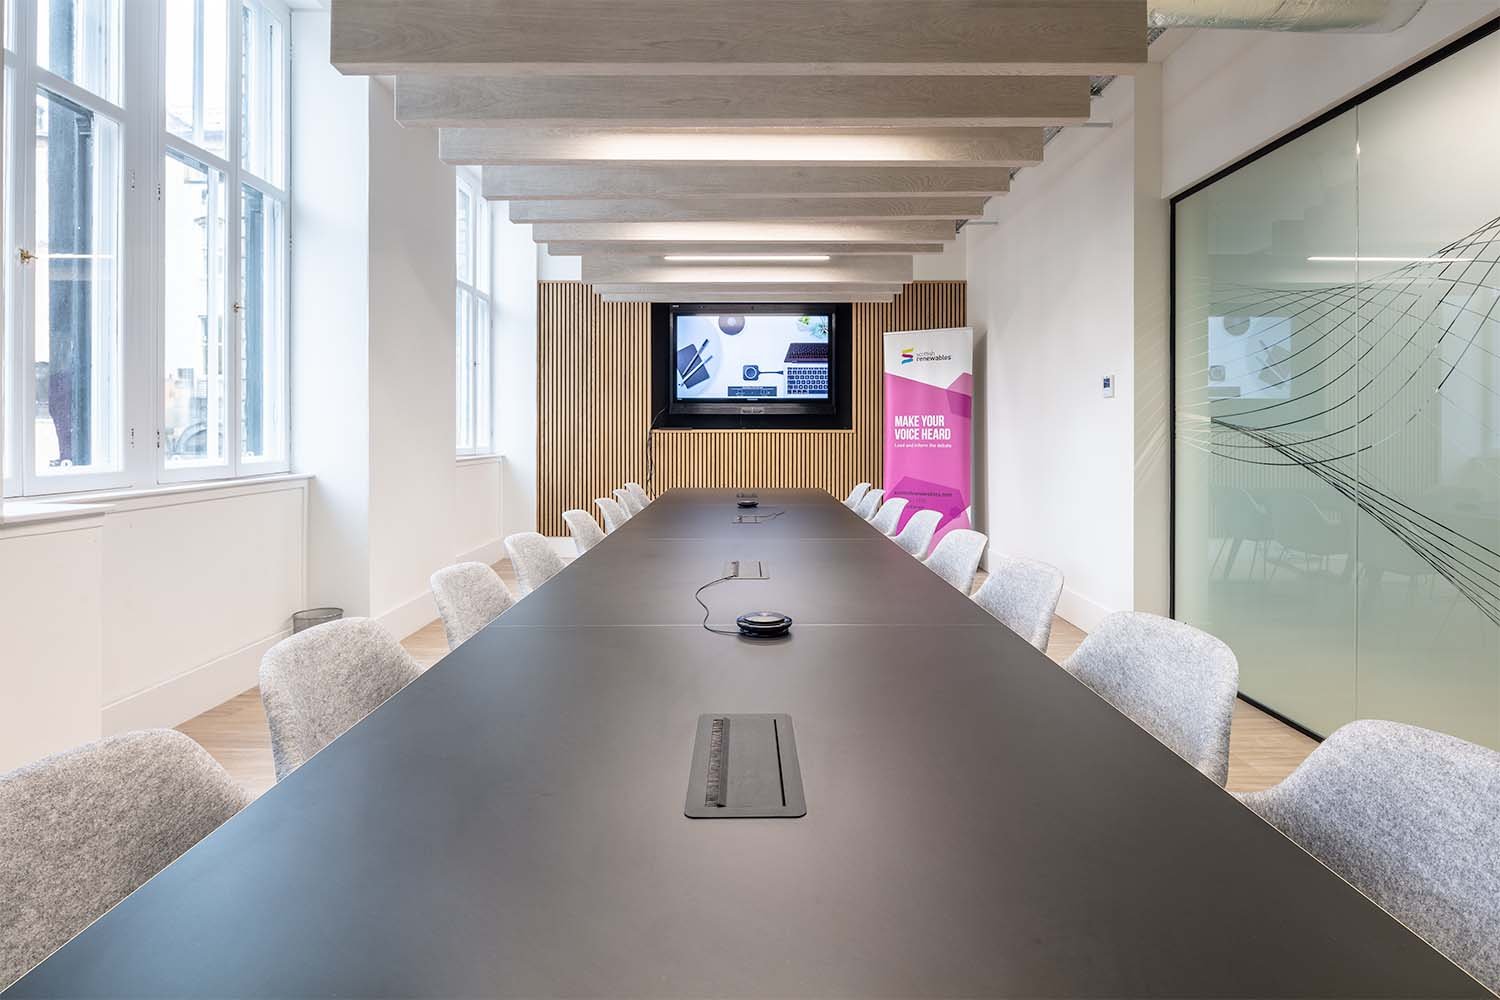 Large meeting room with acoustics